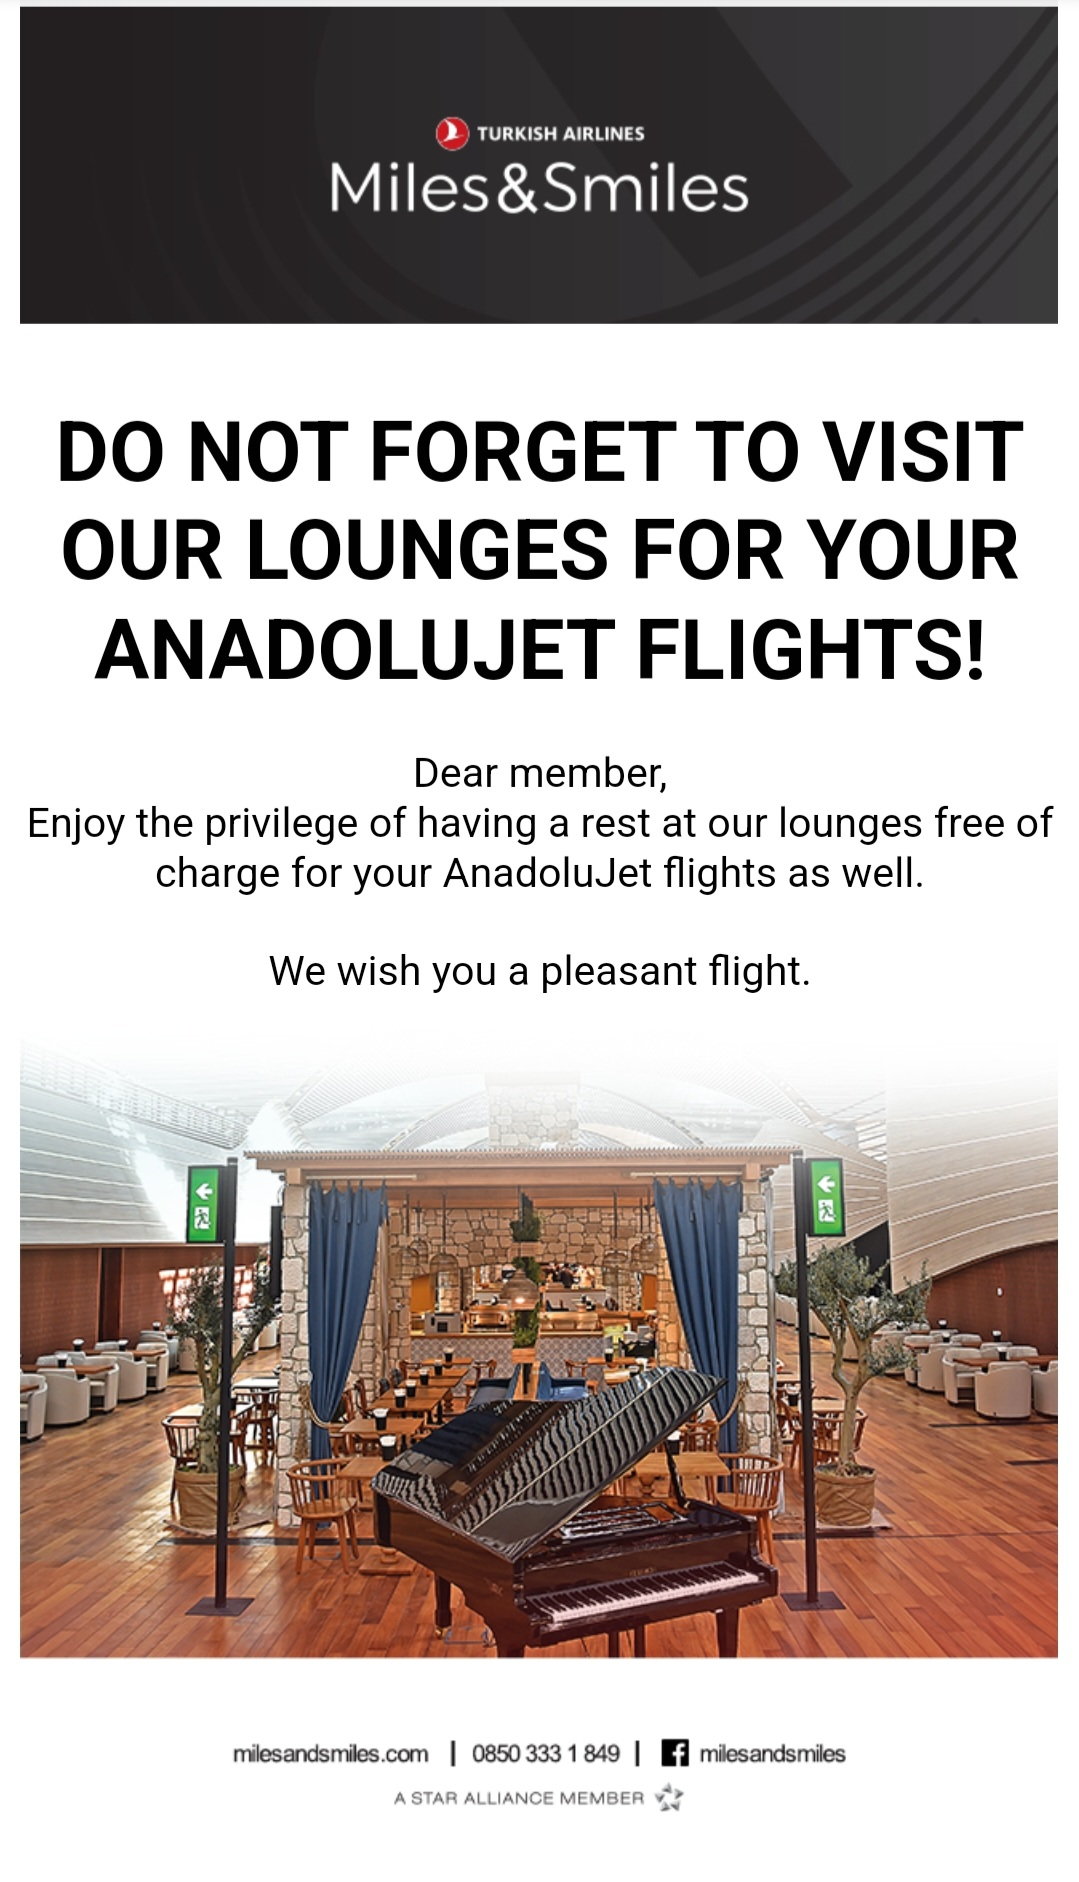 Lounge Access Is Back For Anadolujet